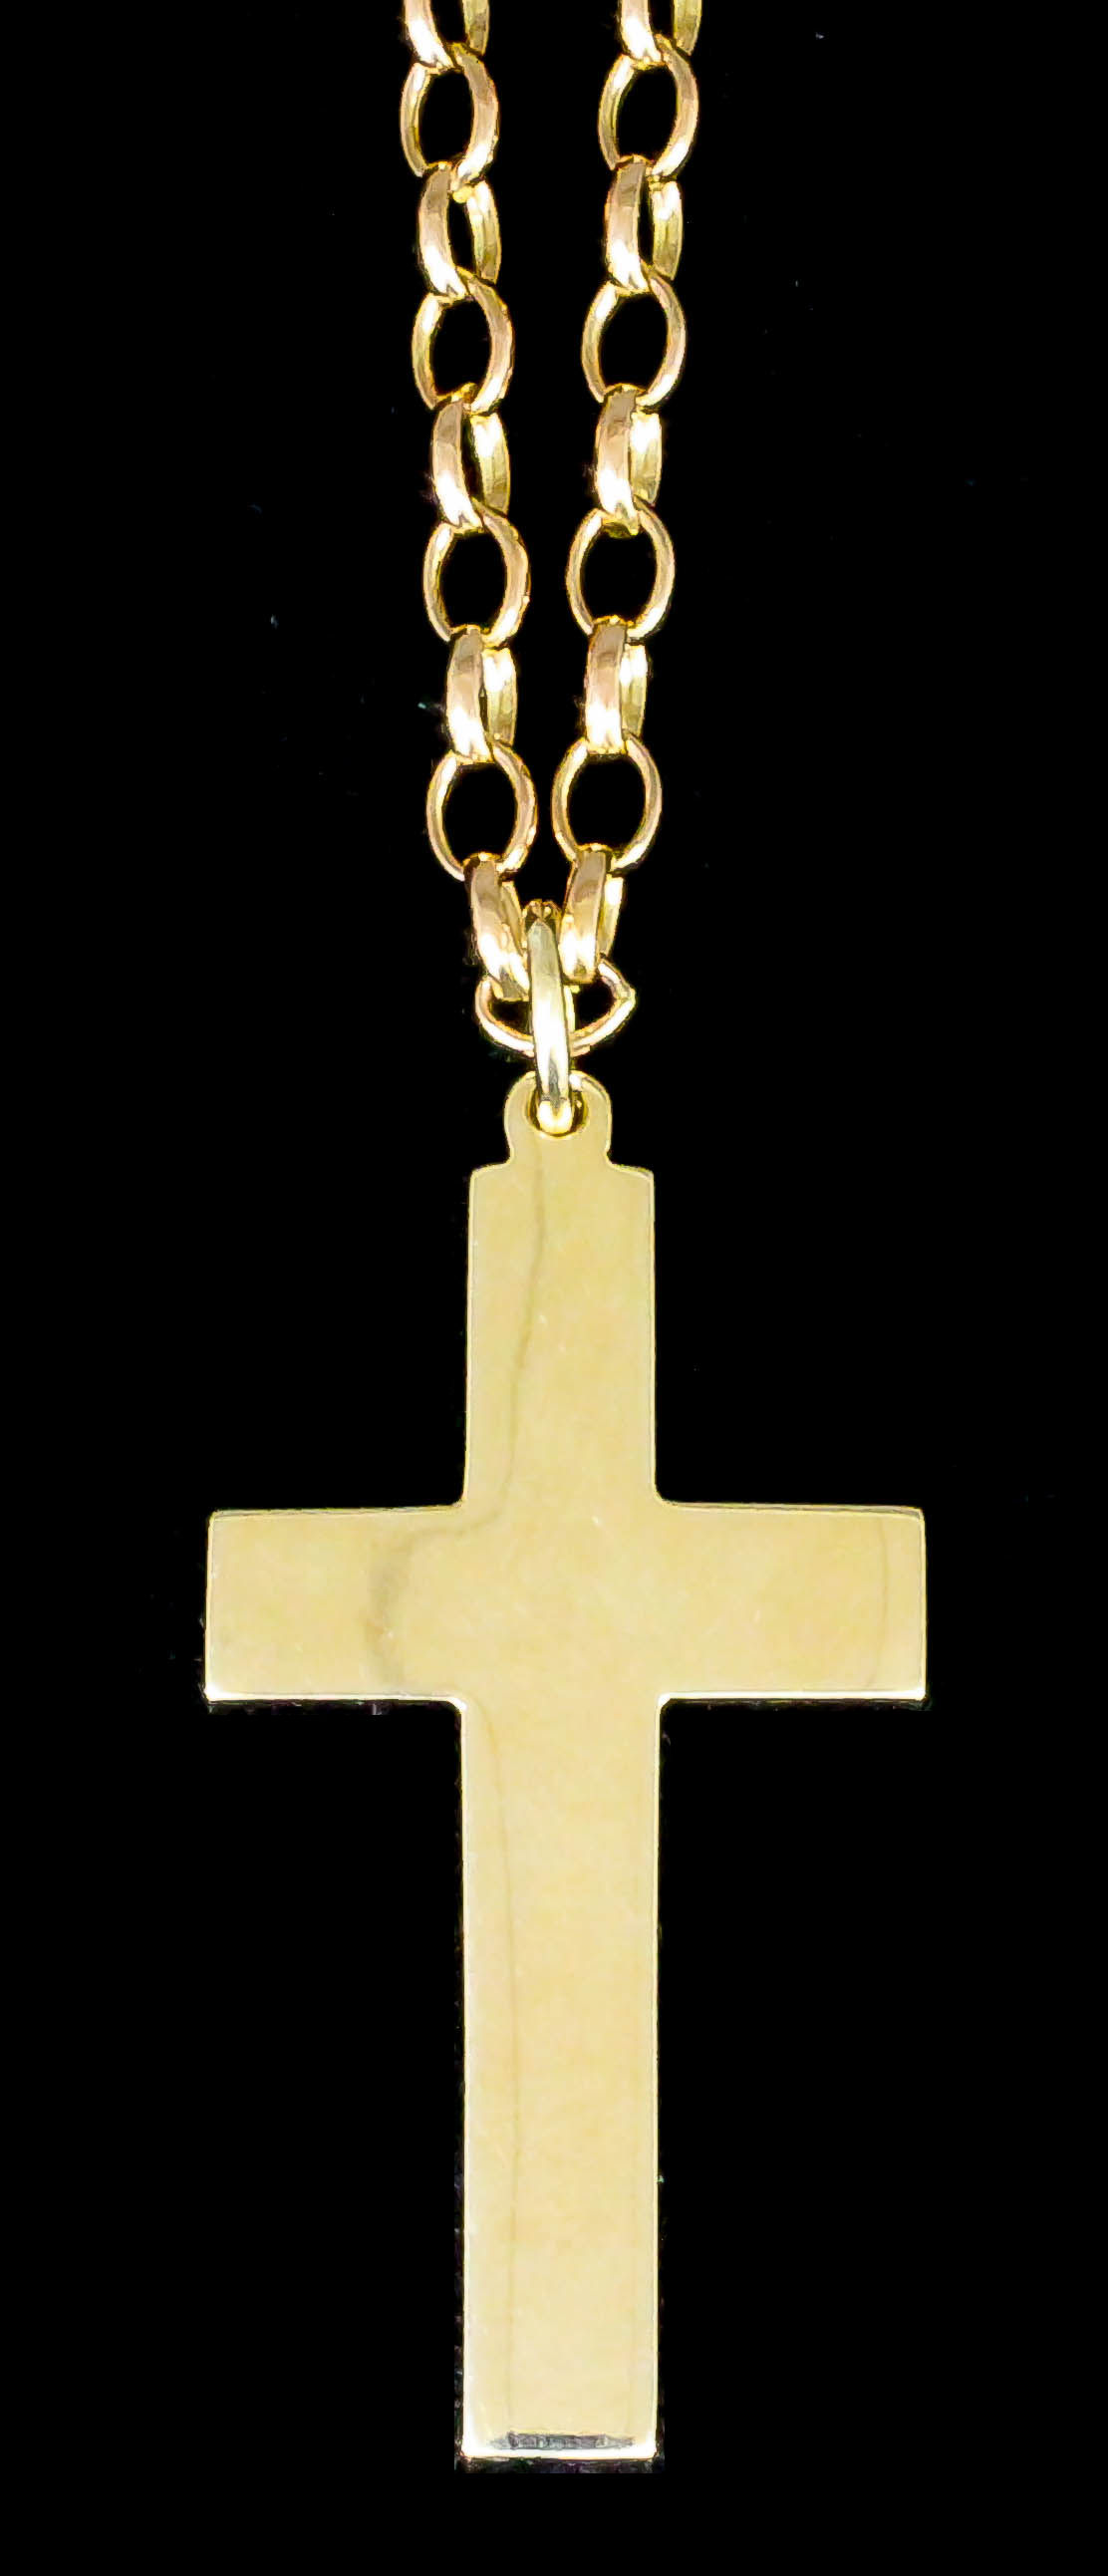 A modern 9ct gold cross pattern pendant, 55mm x 30mm overall, on 700mm 9ct gold chain link